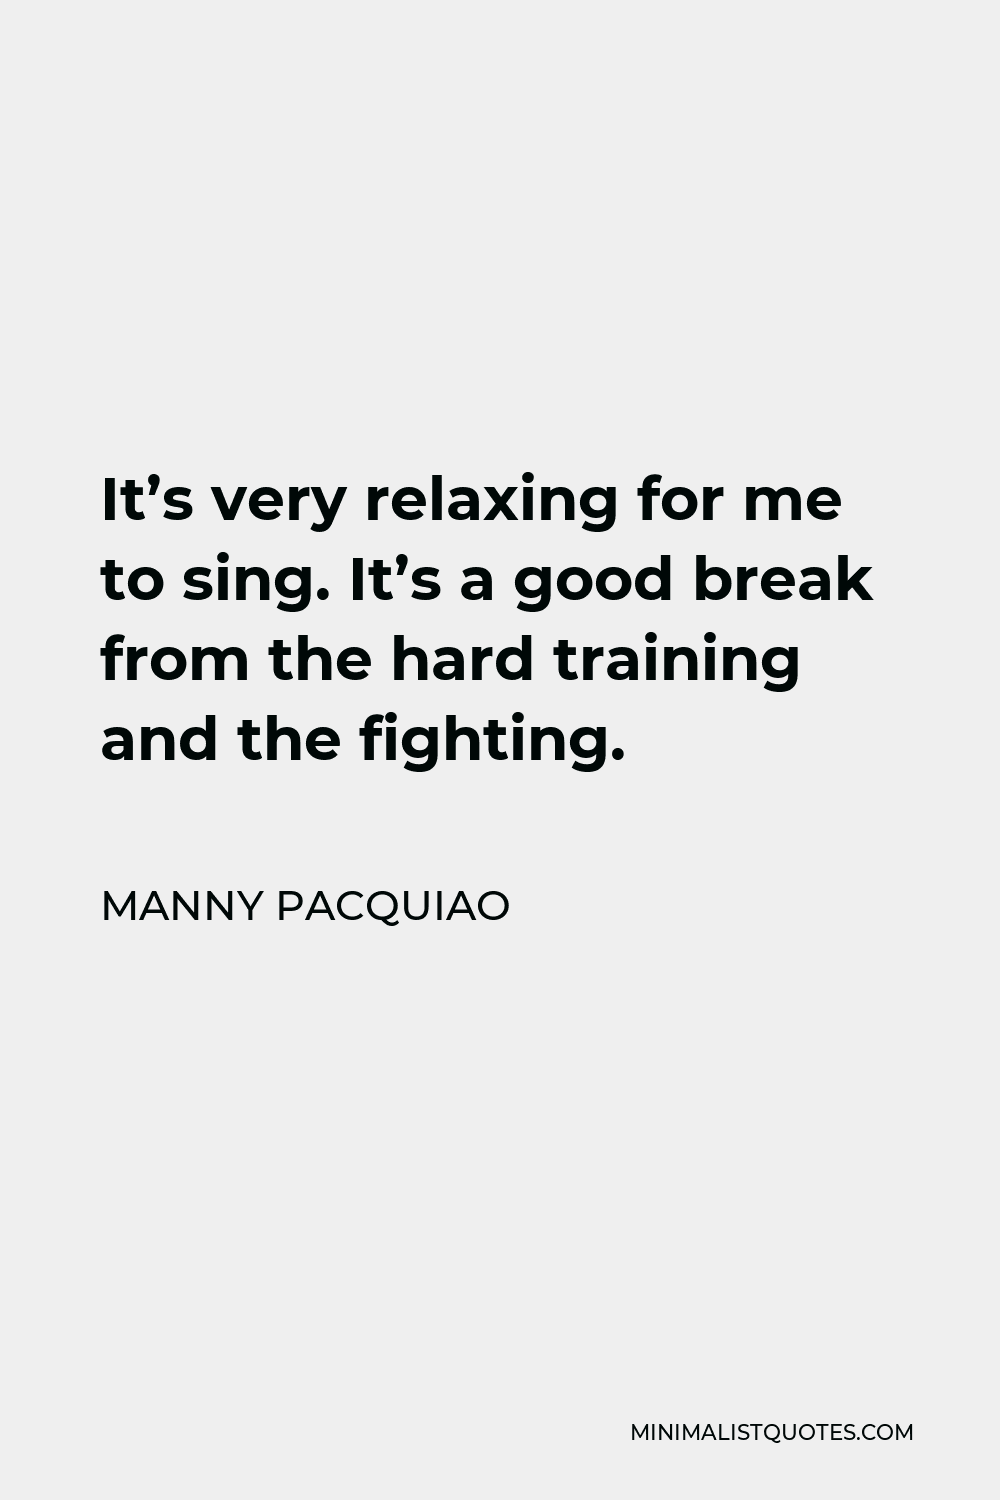 Manny Pacquiao Quote - It’s very relaxing for me to sing. It’s a good break from the hard training and the fighting.